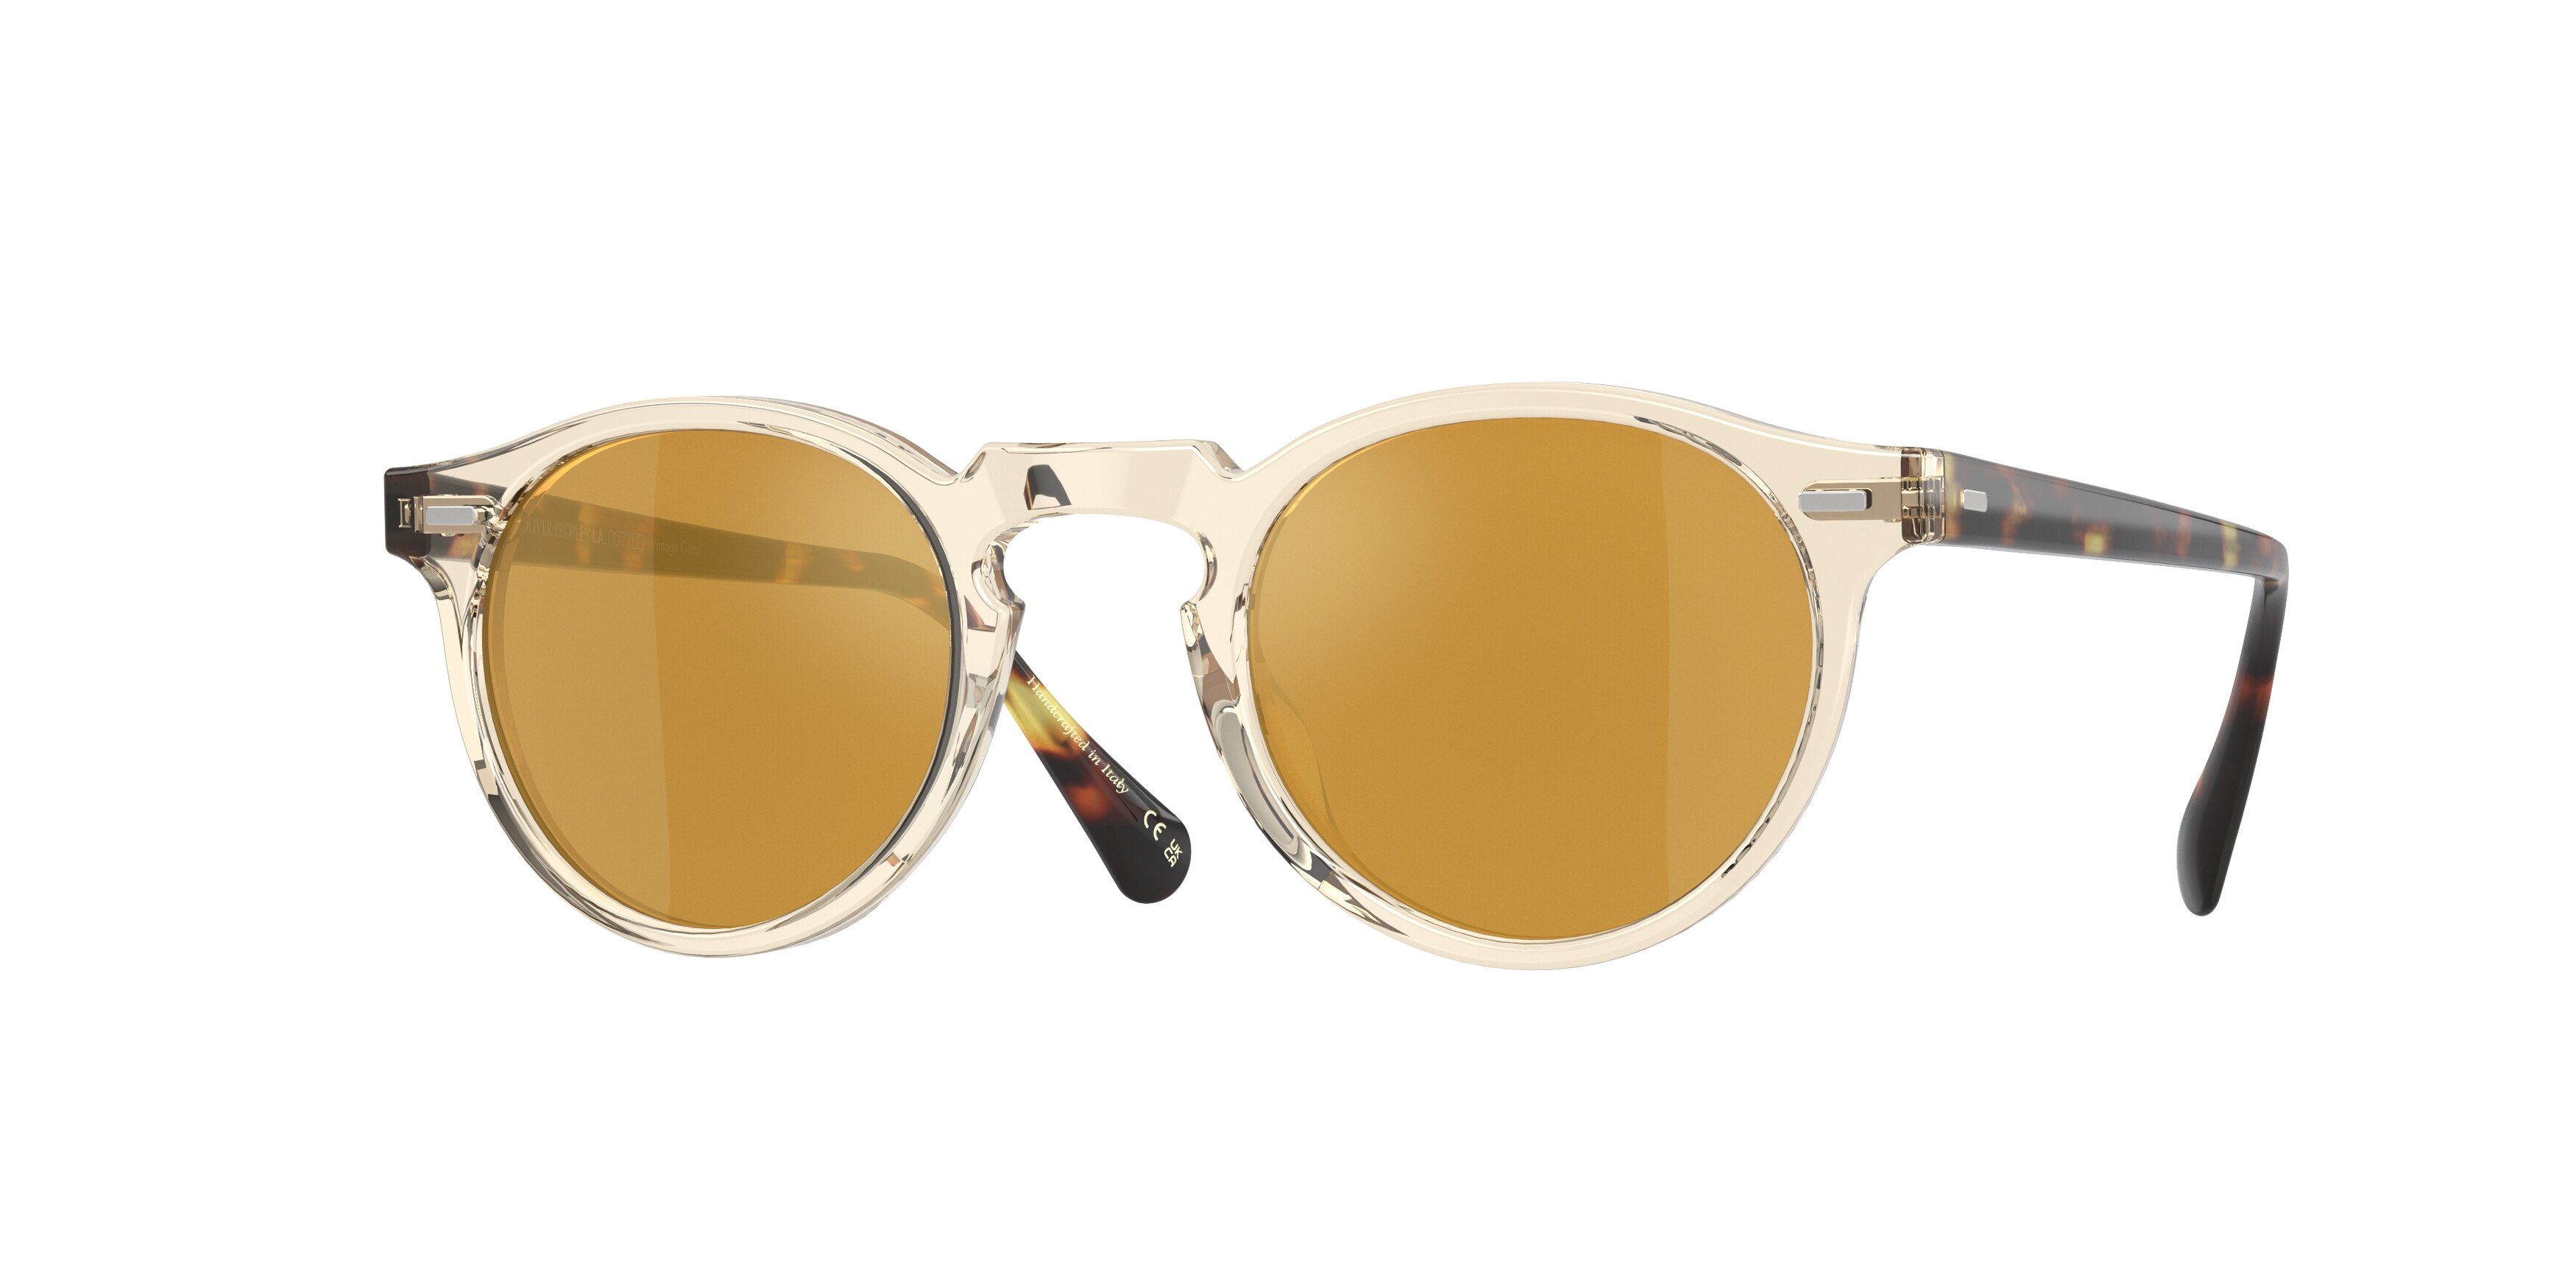 oliver_peoples_0ov5217s_1485w4_buffdtb